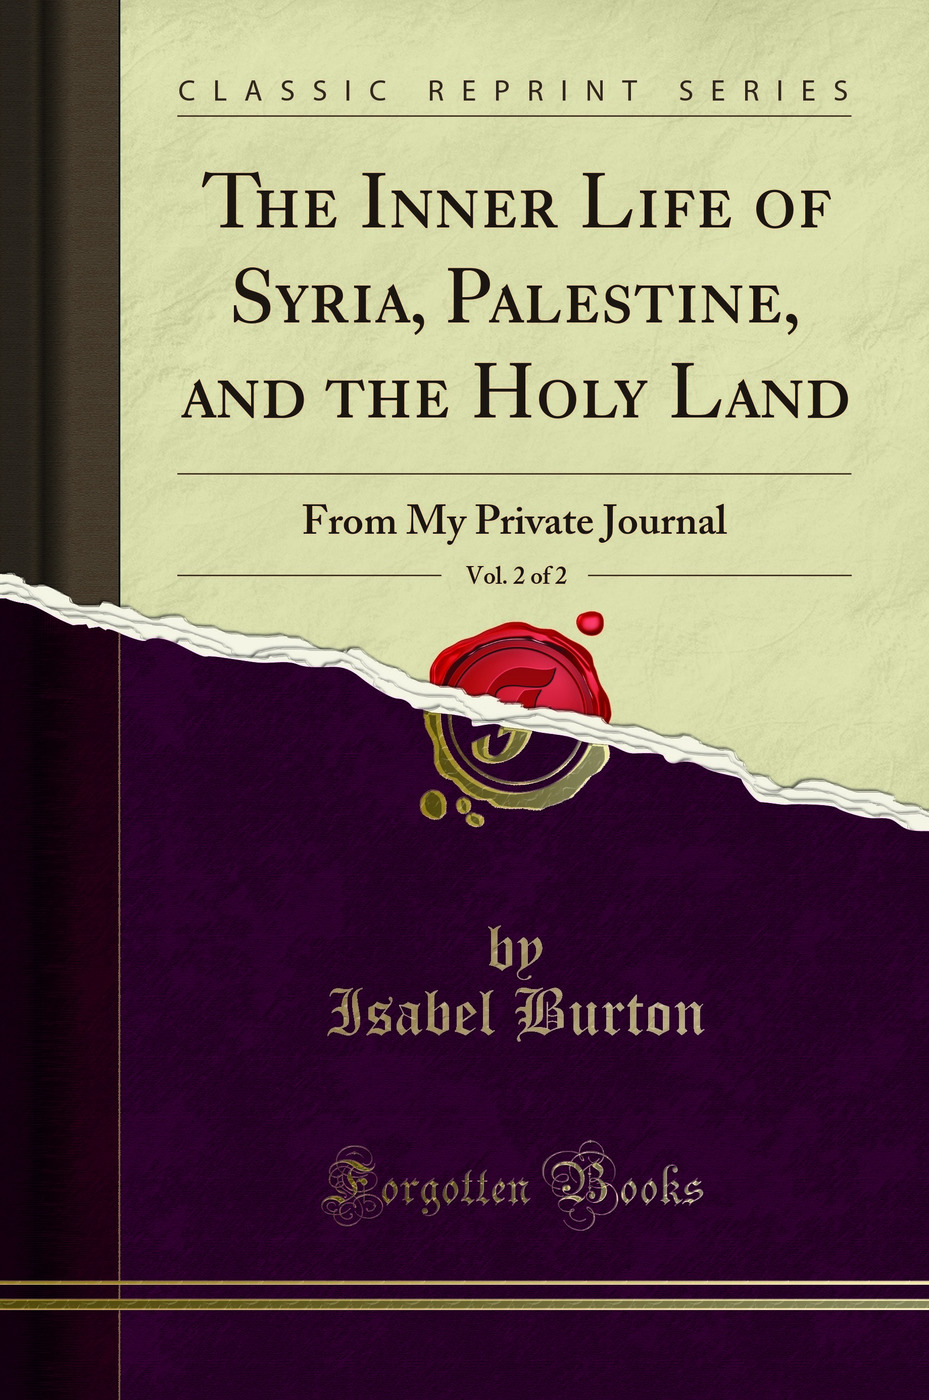 The Inner Life of Syria, Palestine, and the Holy Land, Vol. 2 of 2 - Isabel Burton